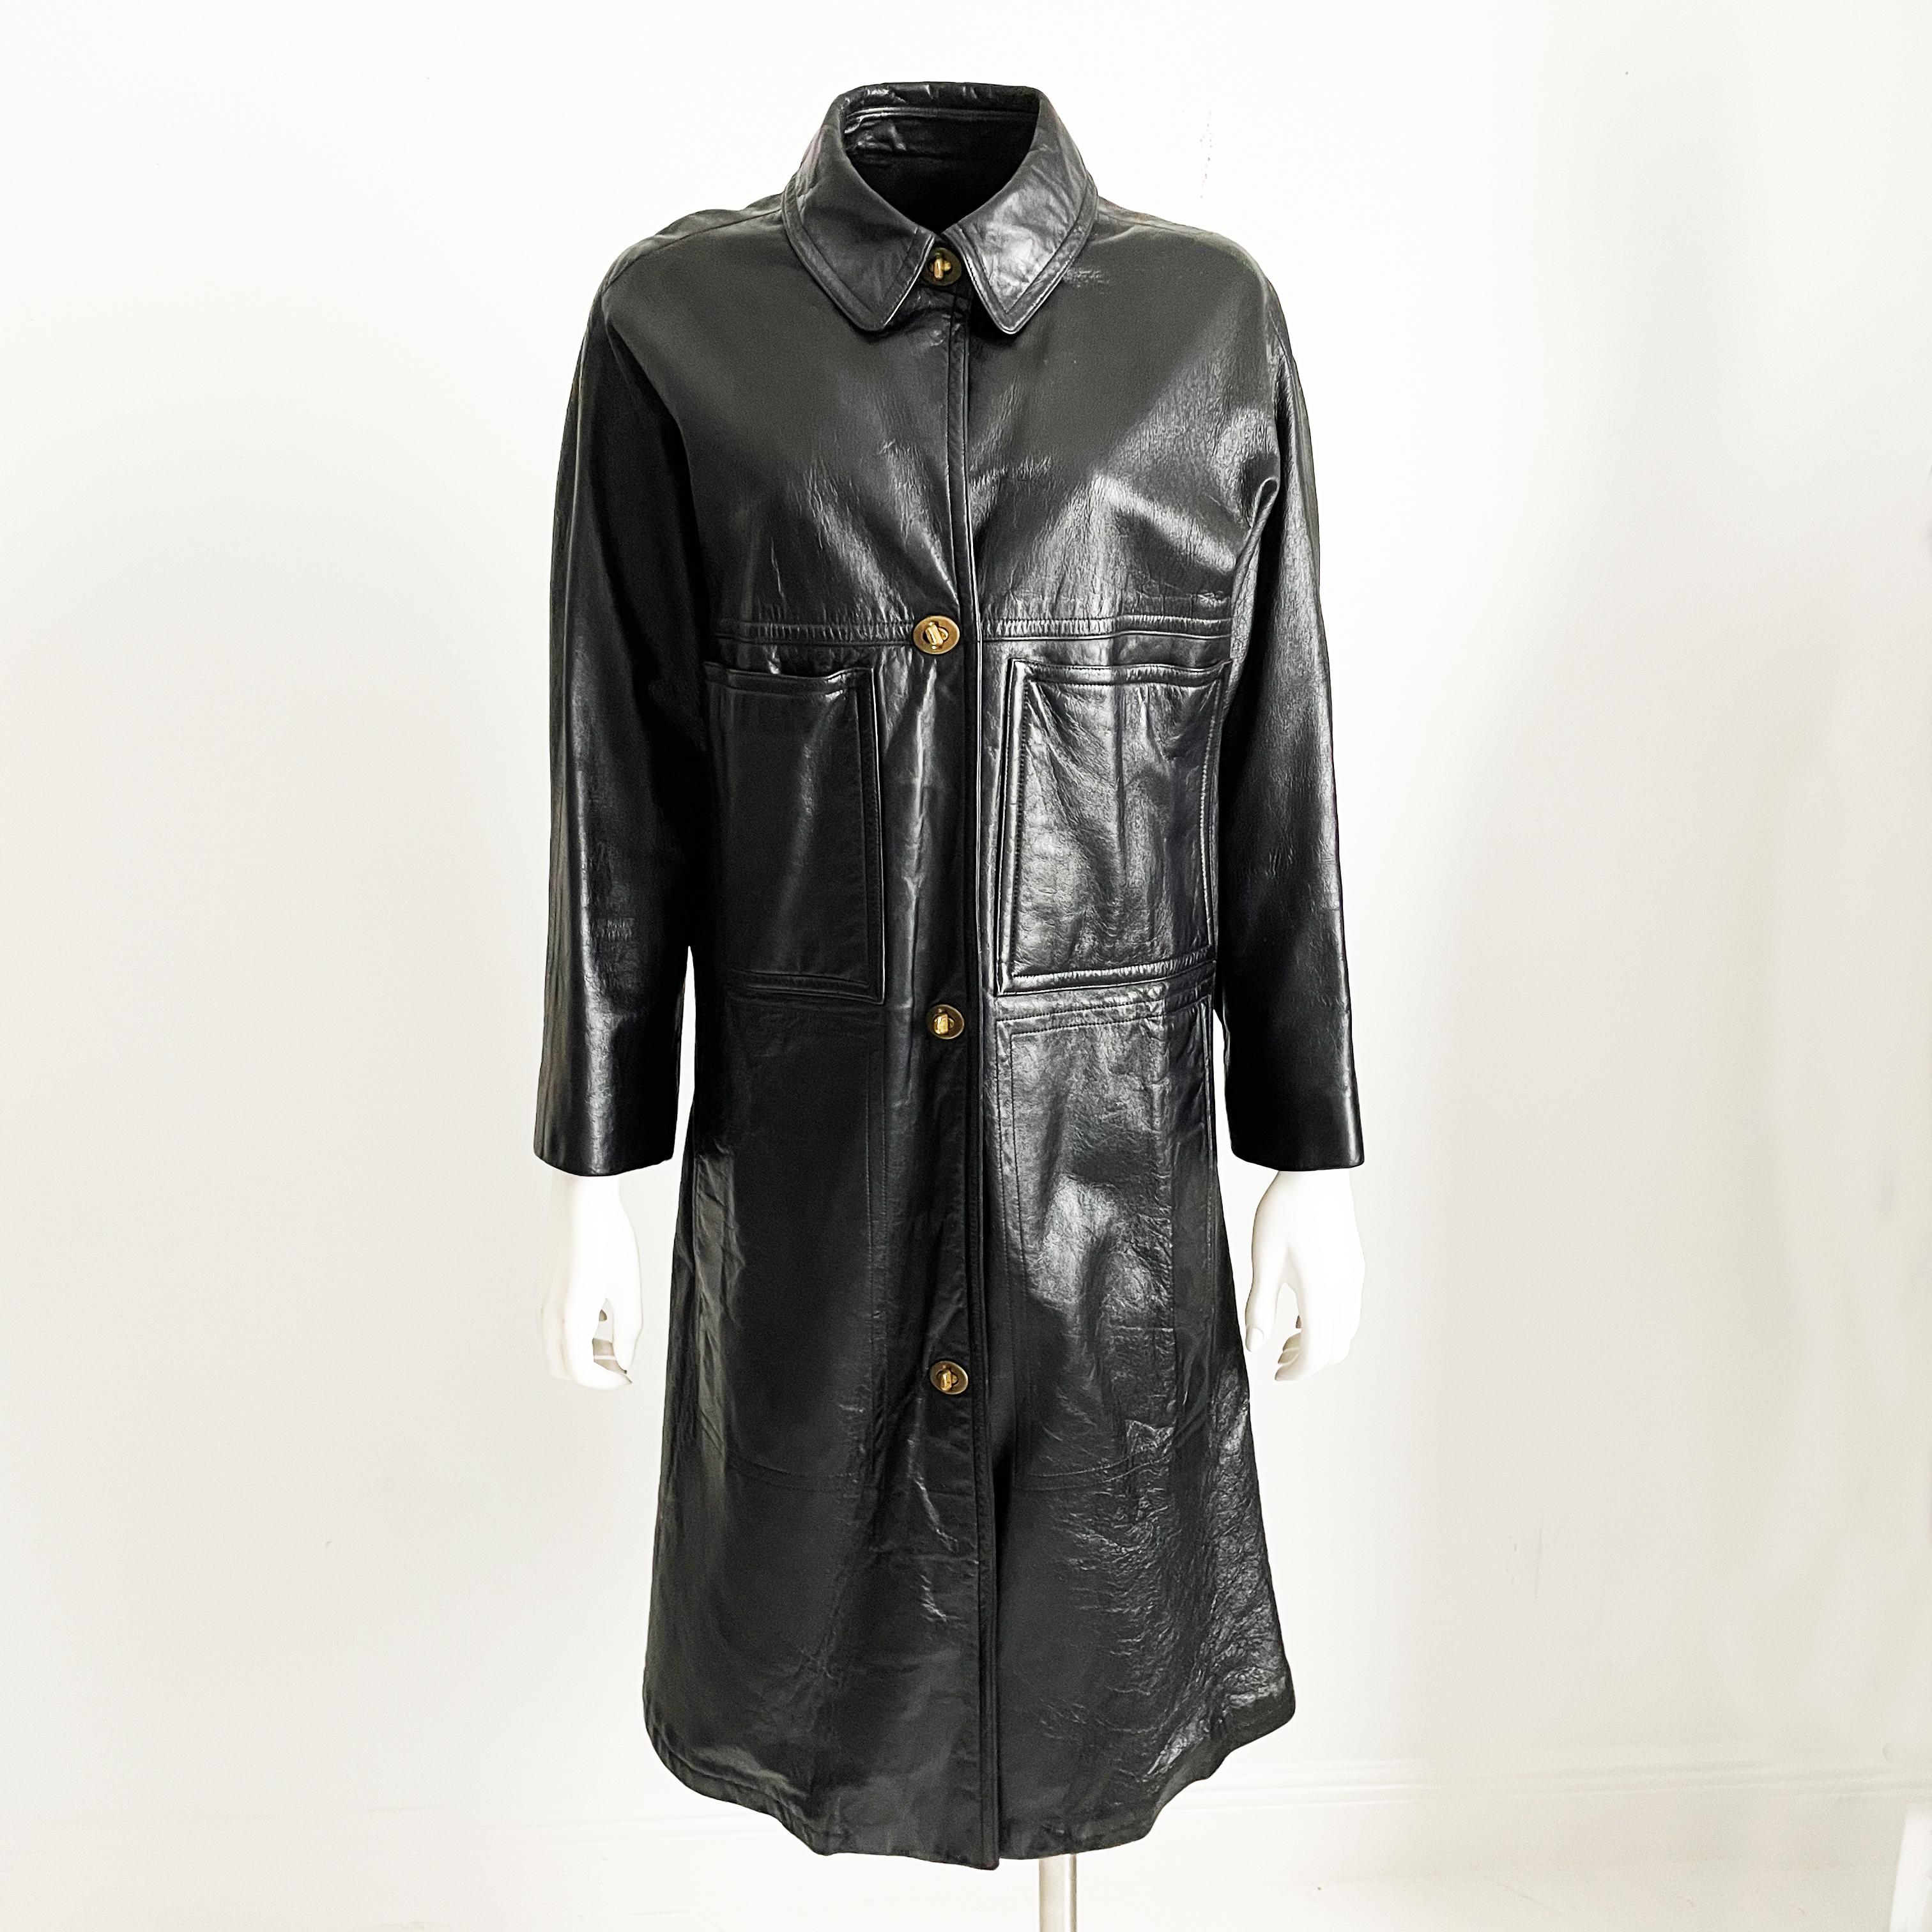 Authentic, preowned, vintage Bonnie Cashin for Sills Black Leather Coat with Turnlock fasteners, circa the mid 60s. Chest & hip pockets/Dolman sleeves/fully-lined/leather clean only. No size tag, fits like modern M: shoulders - 15in, bust - 44in,